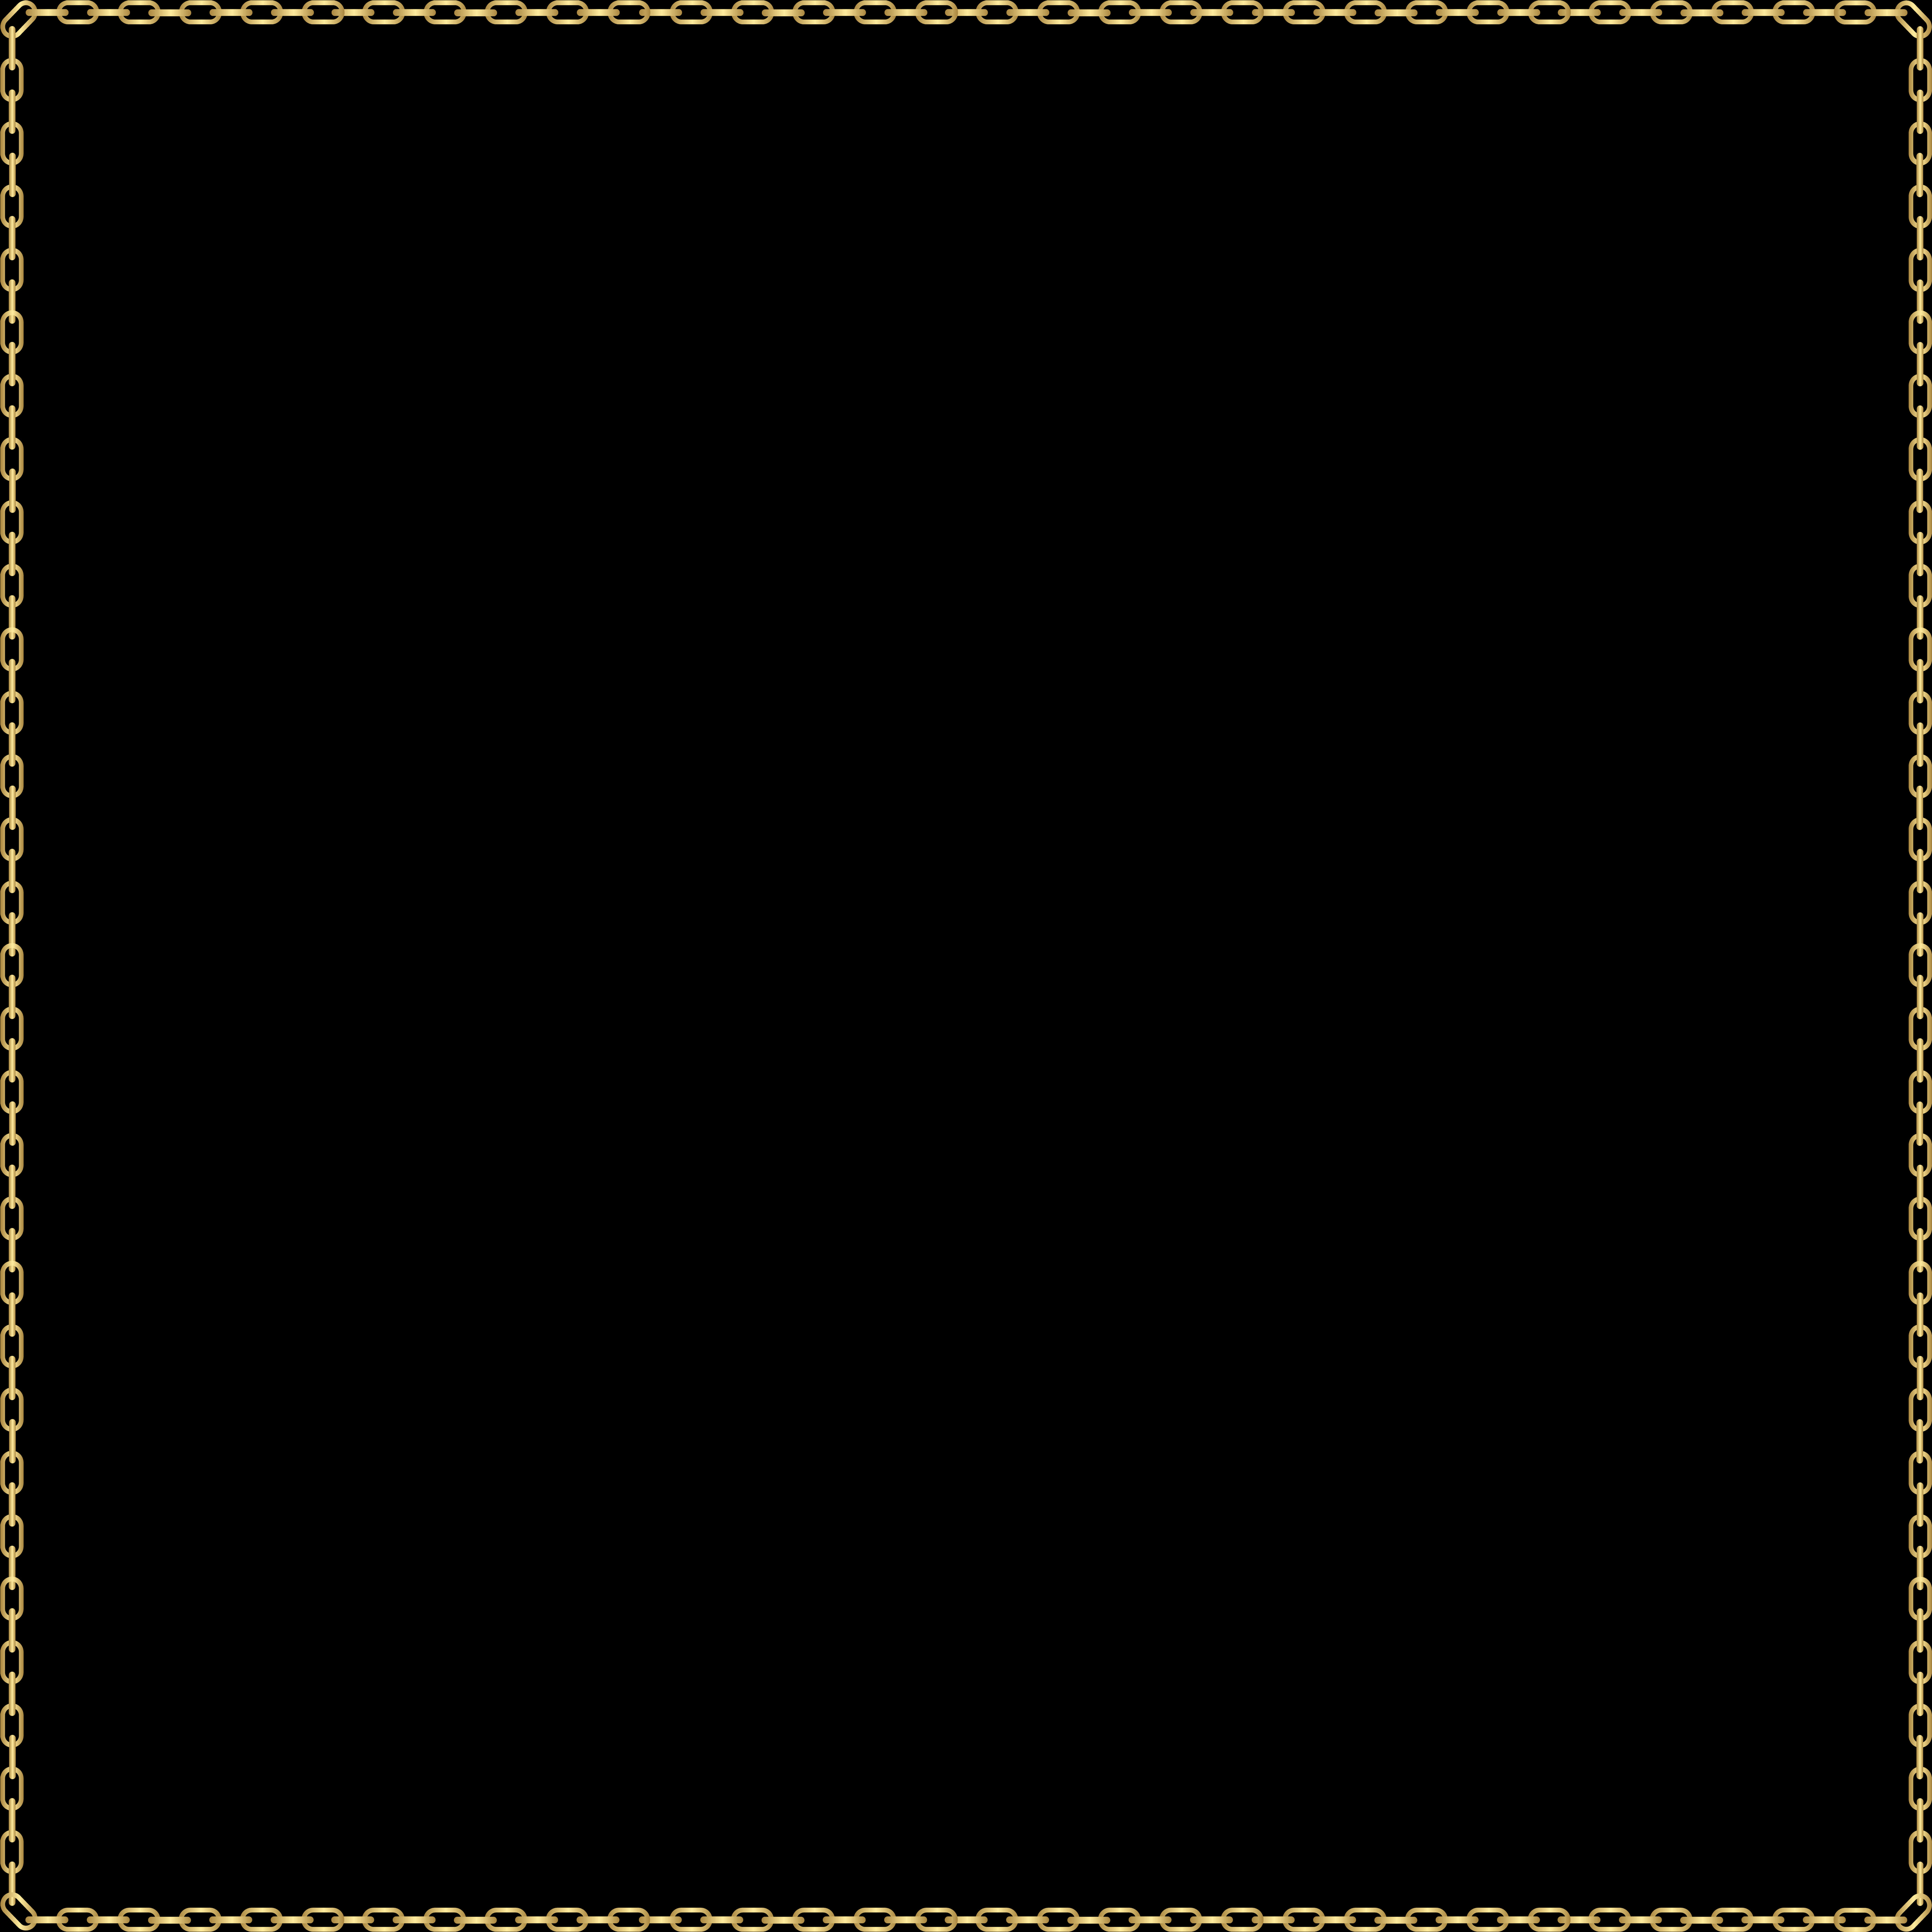 A Black Background With A Gold Chain